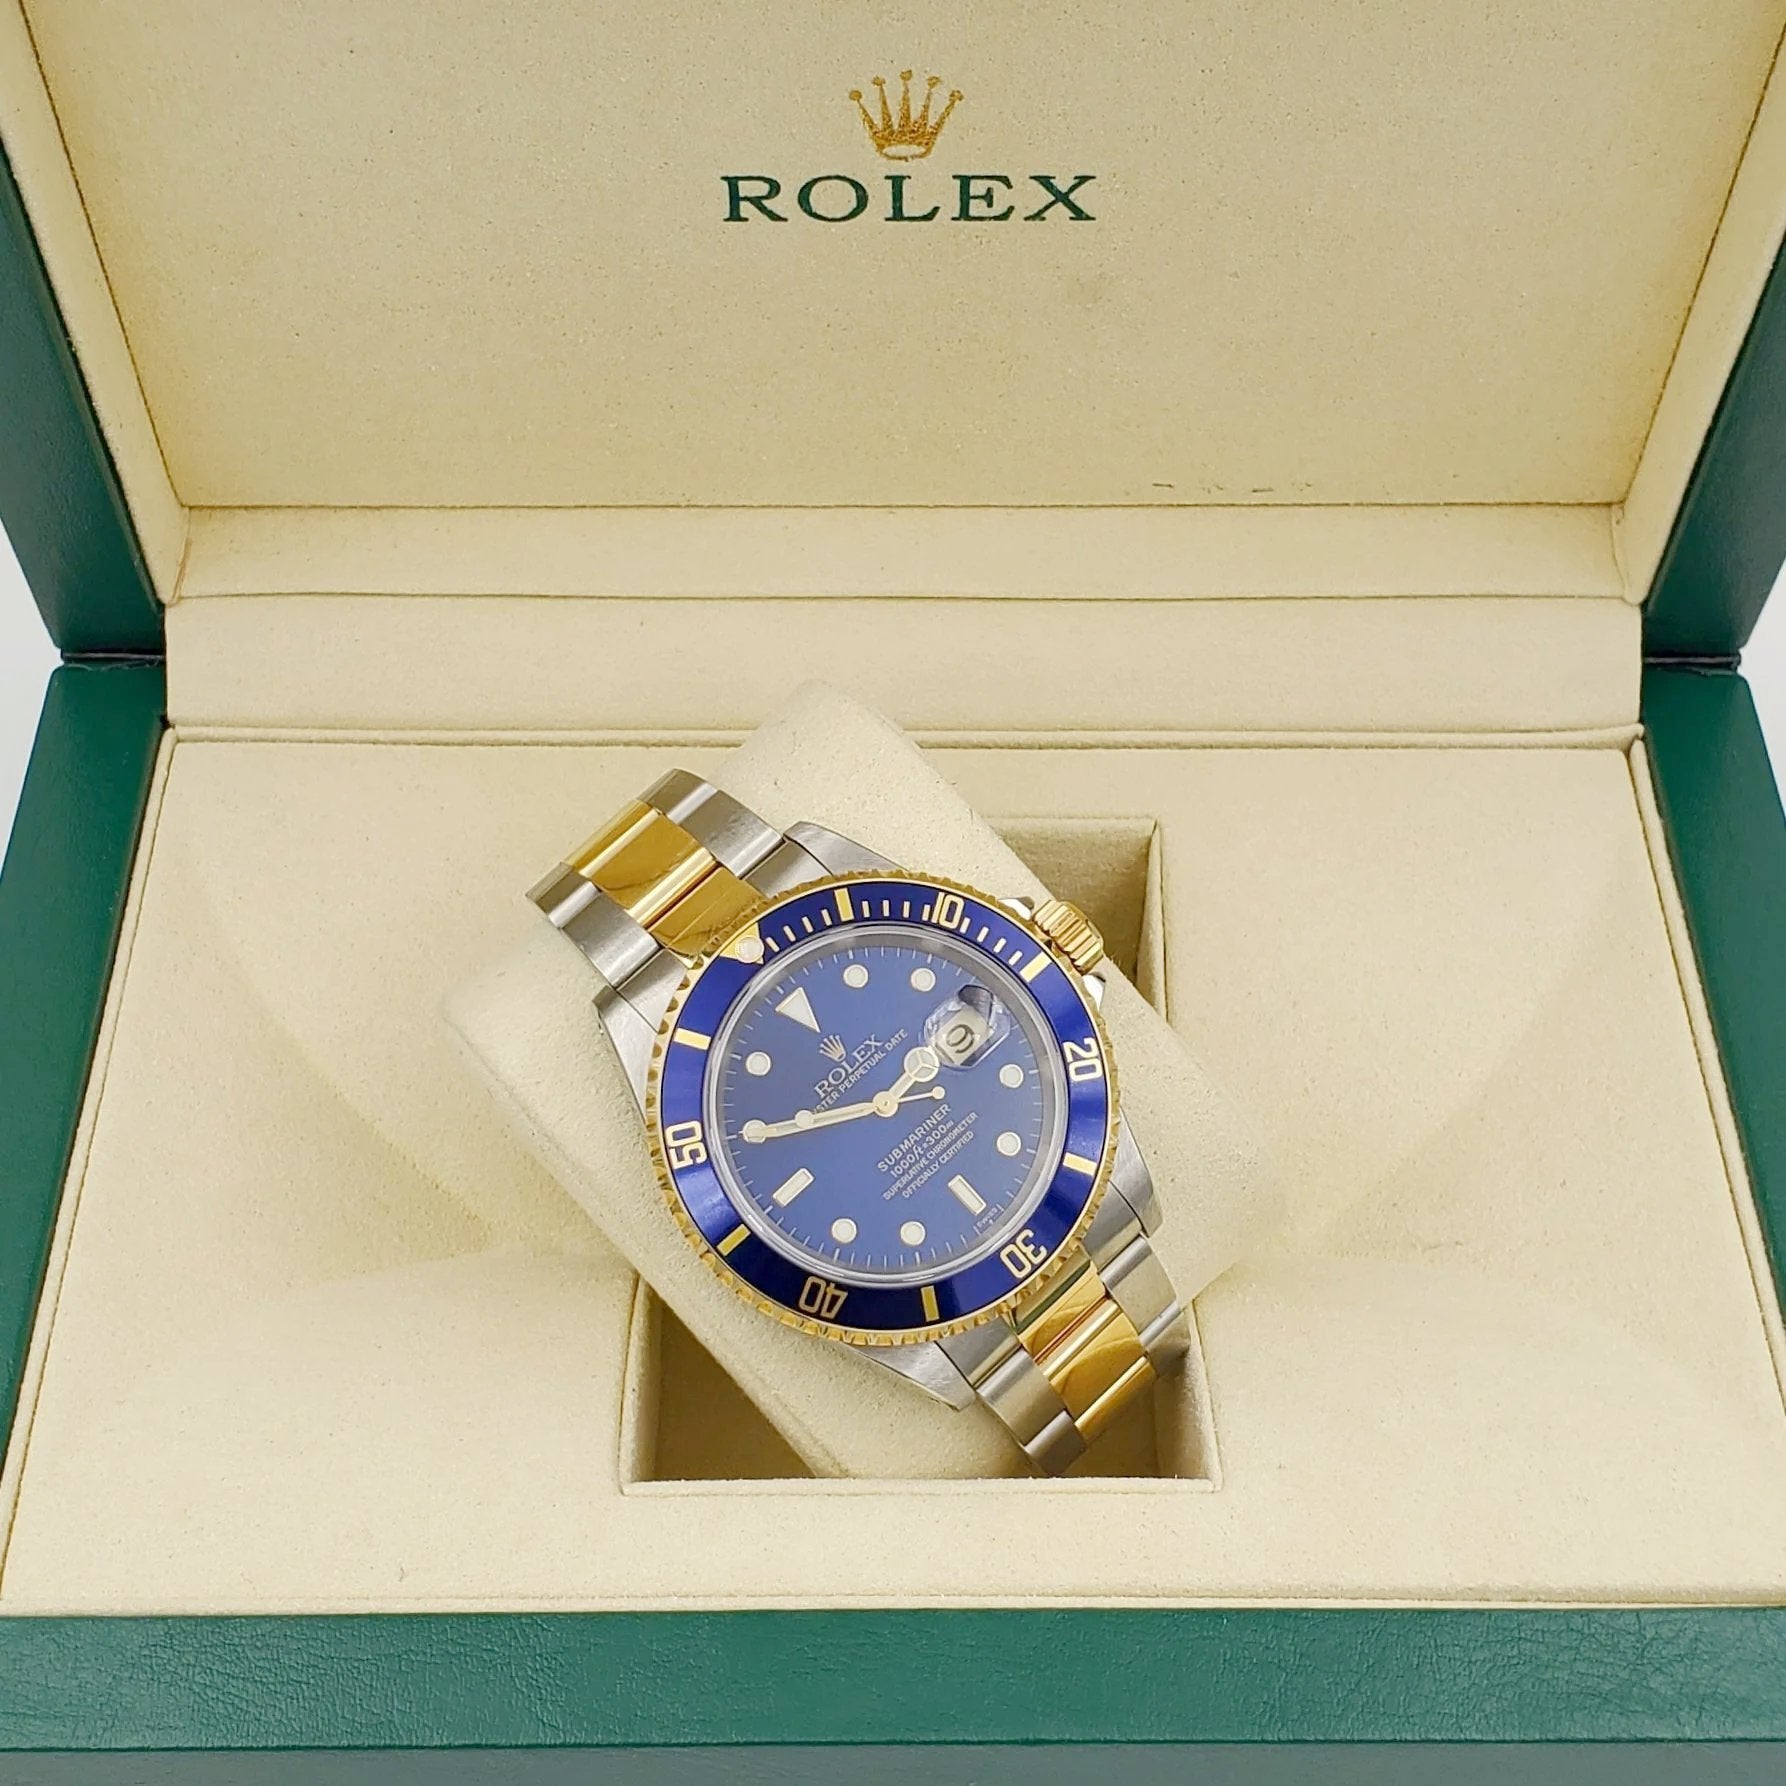 2005 Men's Rolex 40mm Submariner Oyster Perpetual Two Tone 18K Yellow Gold / Stainless Steel Watch with Blue Dial and Blue Bezel. (Pre-Owned 16613)